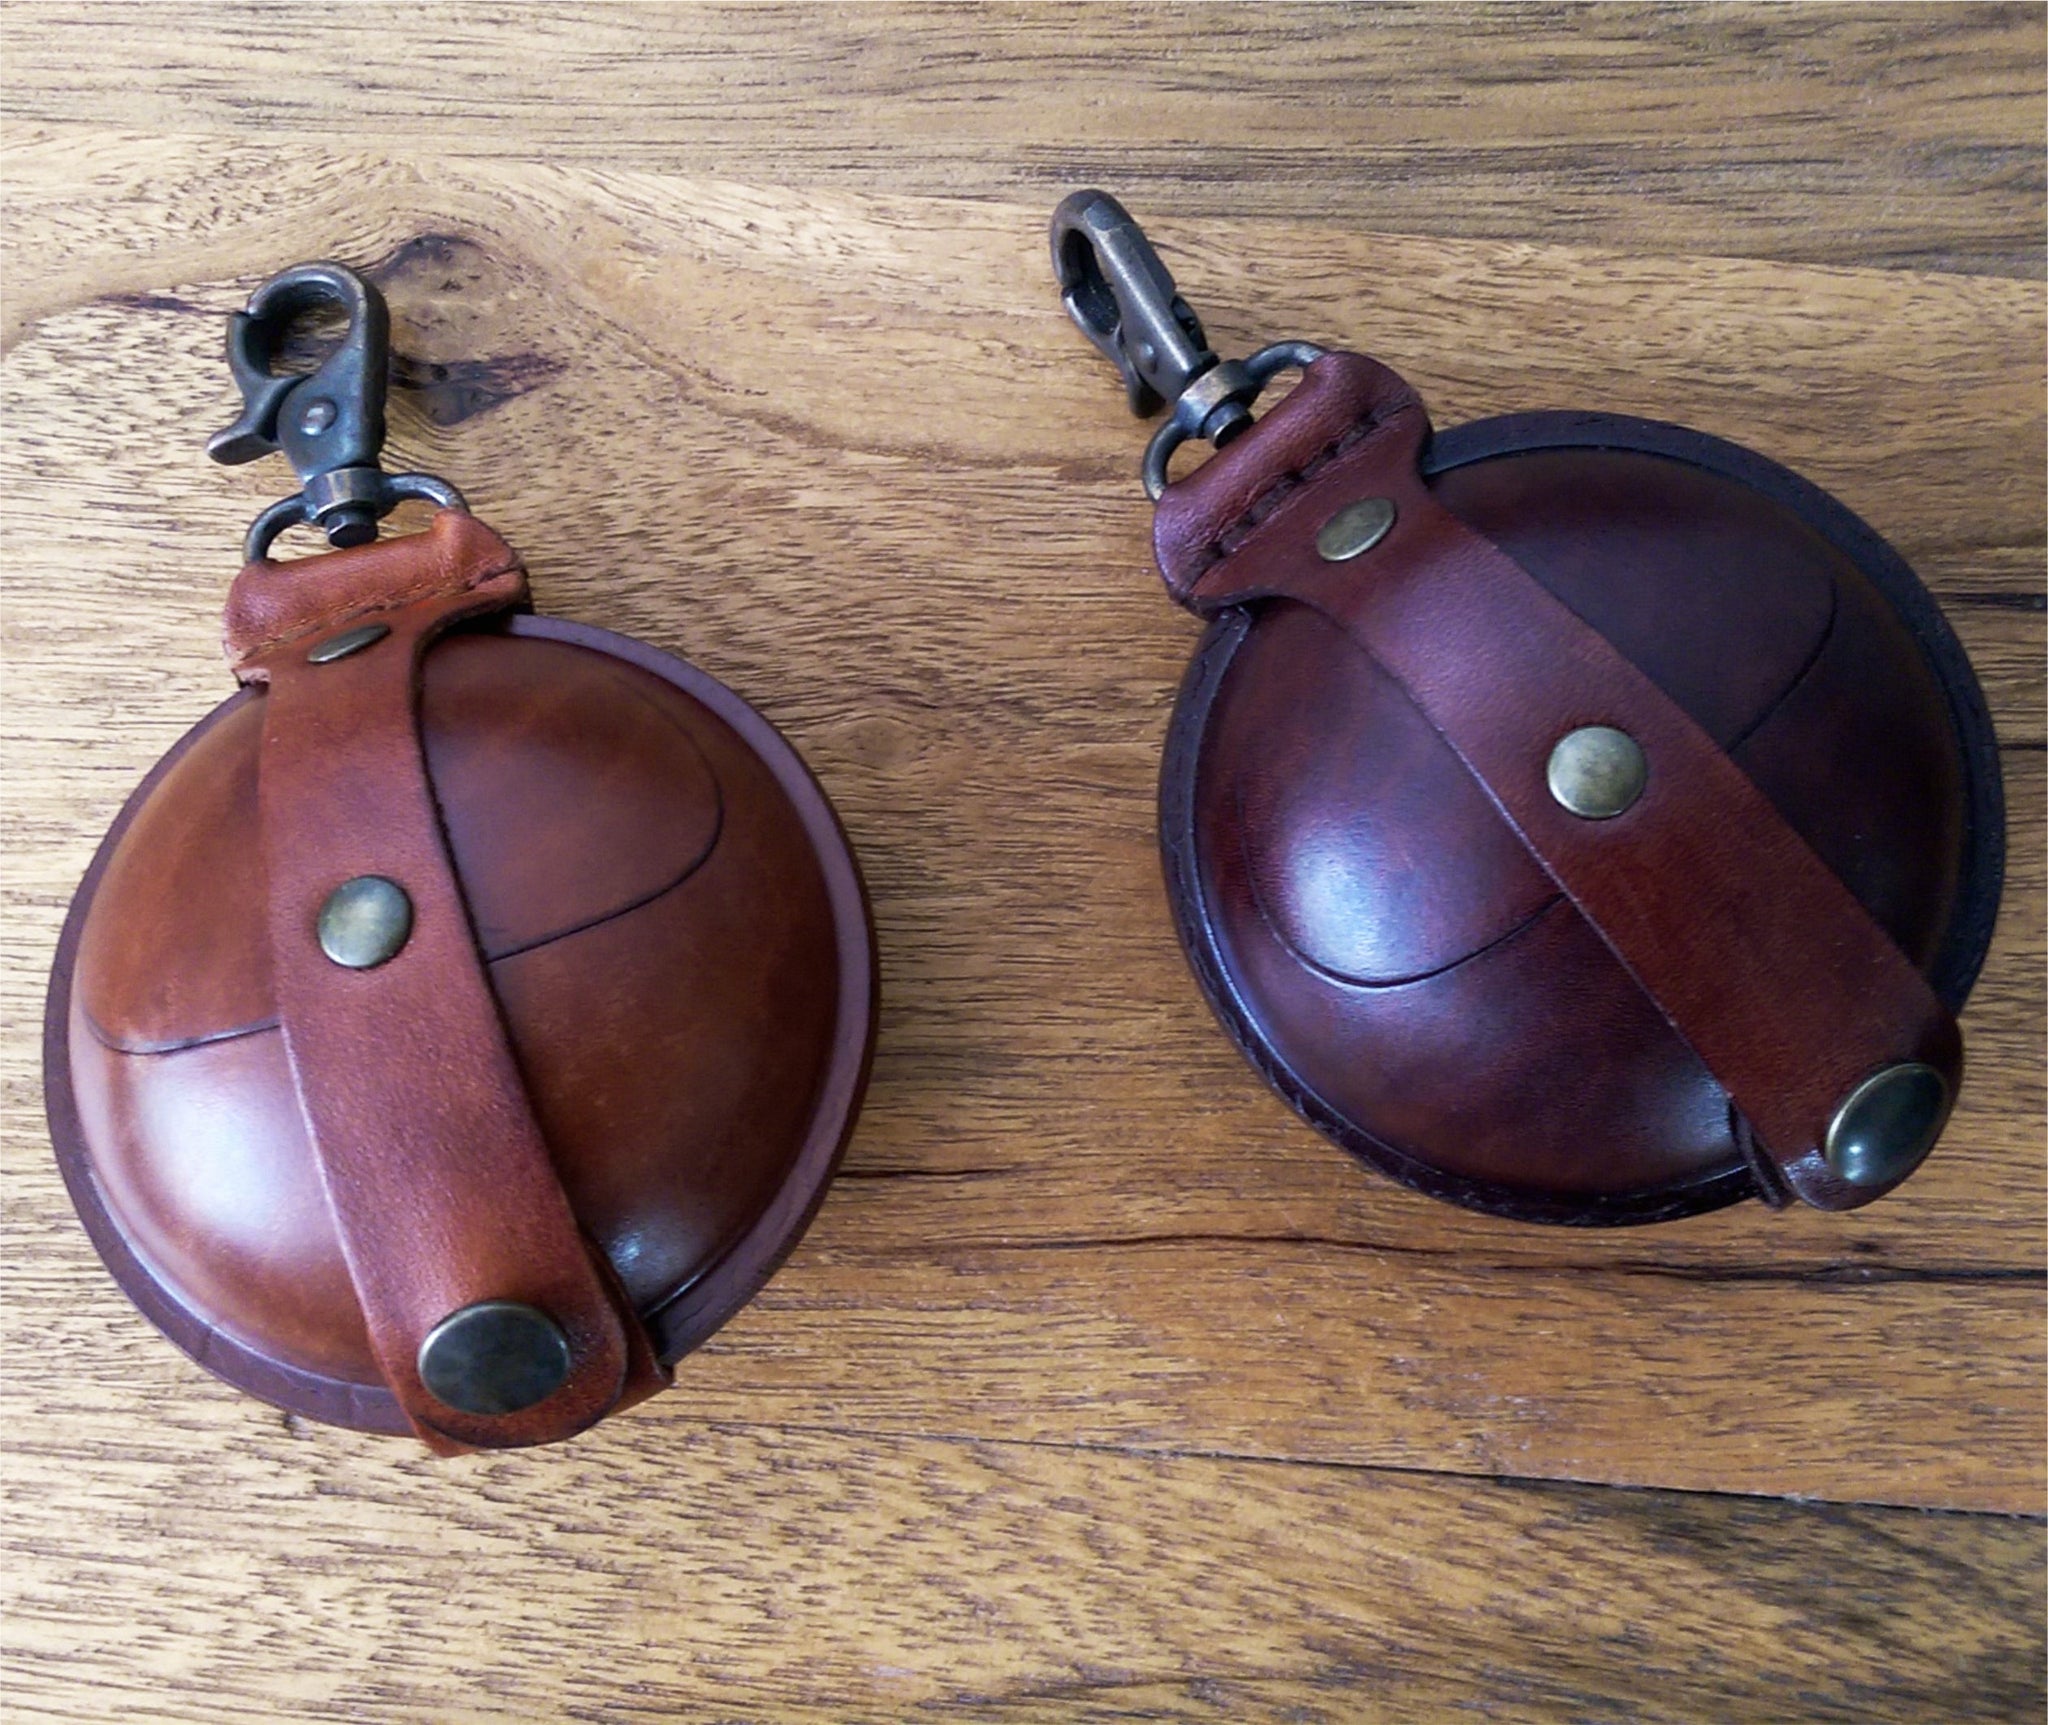 This unisex leather coin purse is handmade with sturdy Italian leather. It`s ball-shaped, lightweight with a clean cut, and can be attached to your bag, keychain, belt loops, or strap. The perfect coin pouch, earbuds case, keyholder wallet, change purse, and gift for him or her.  